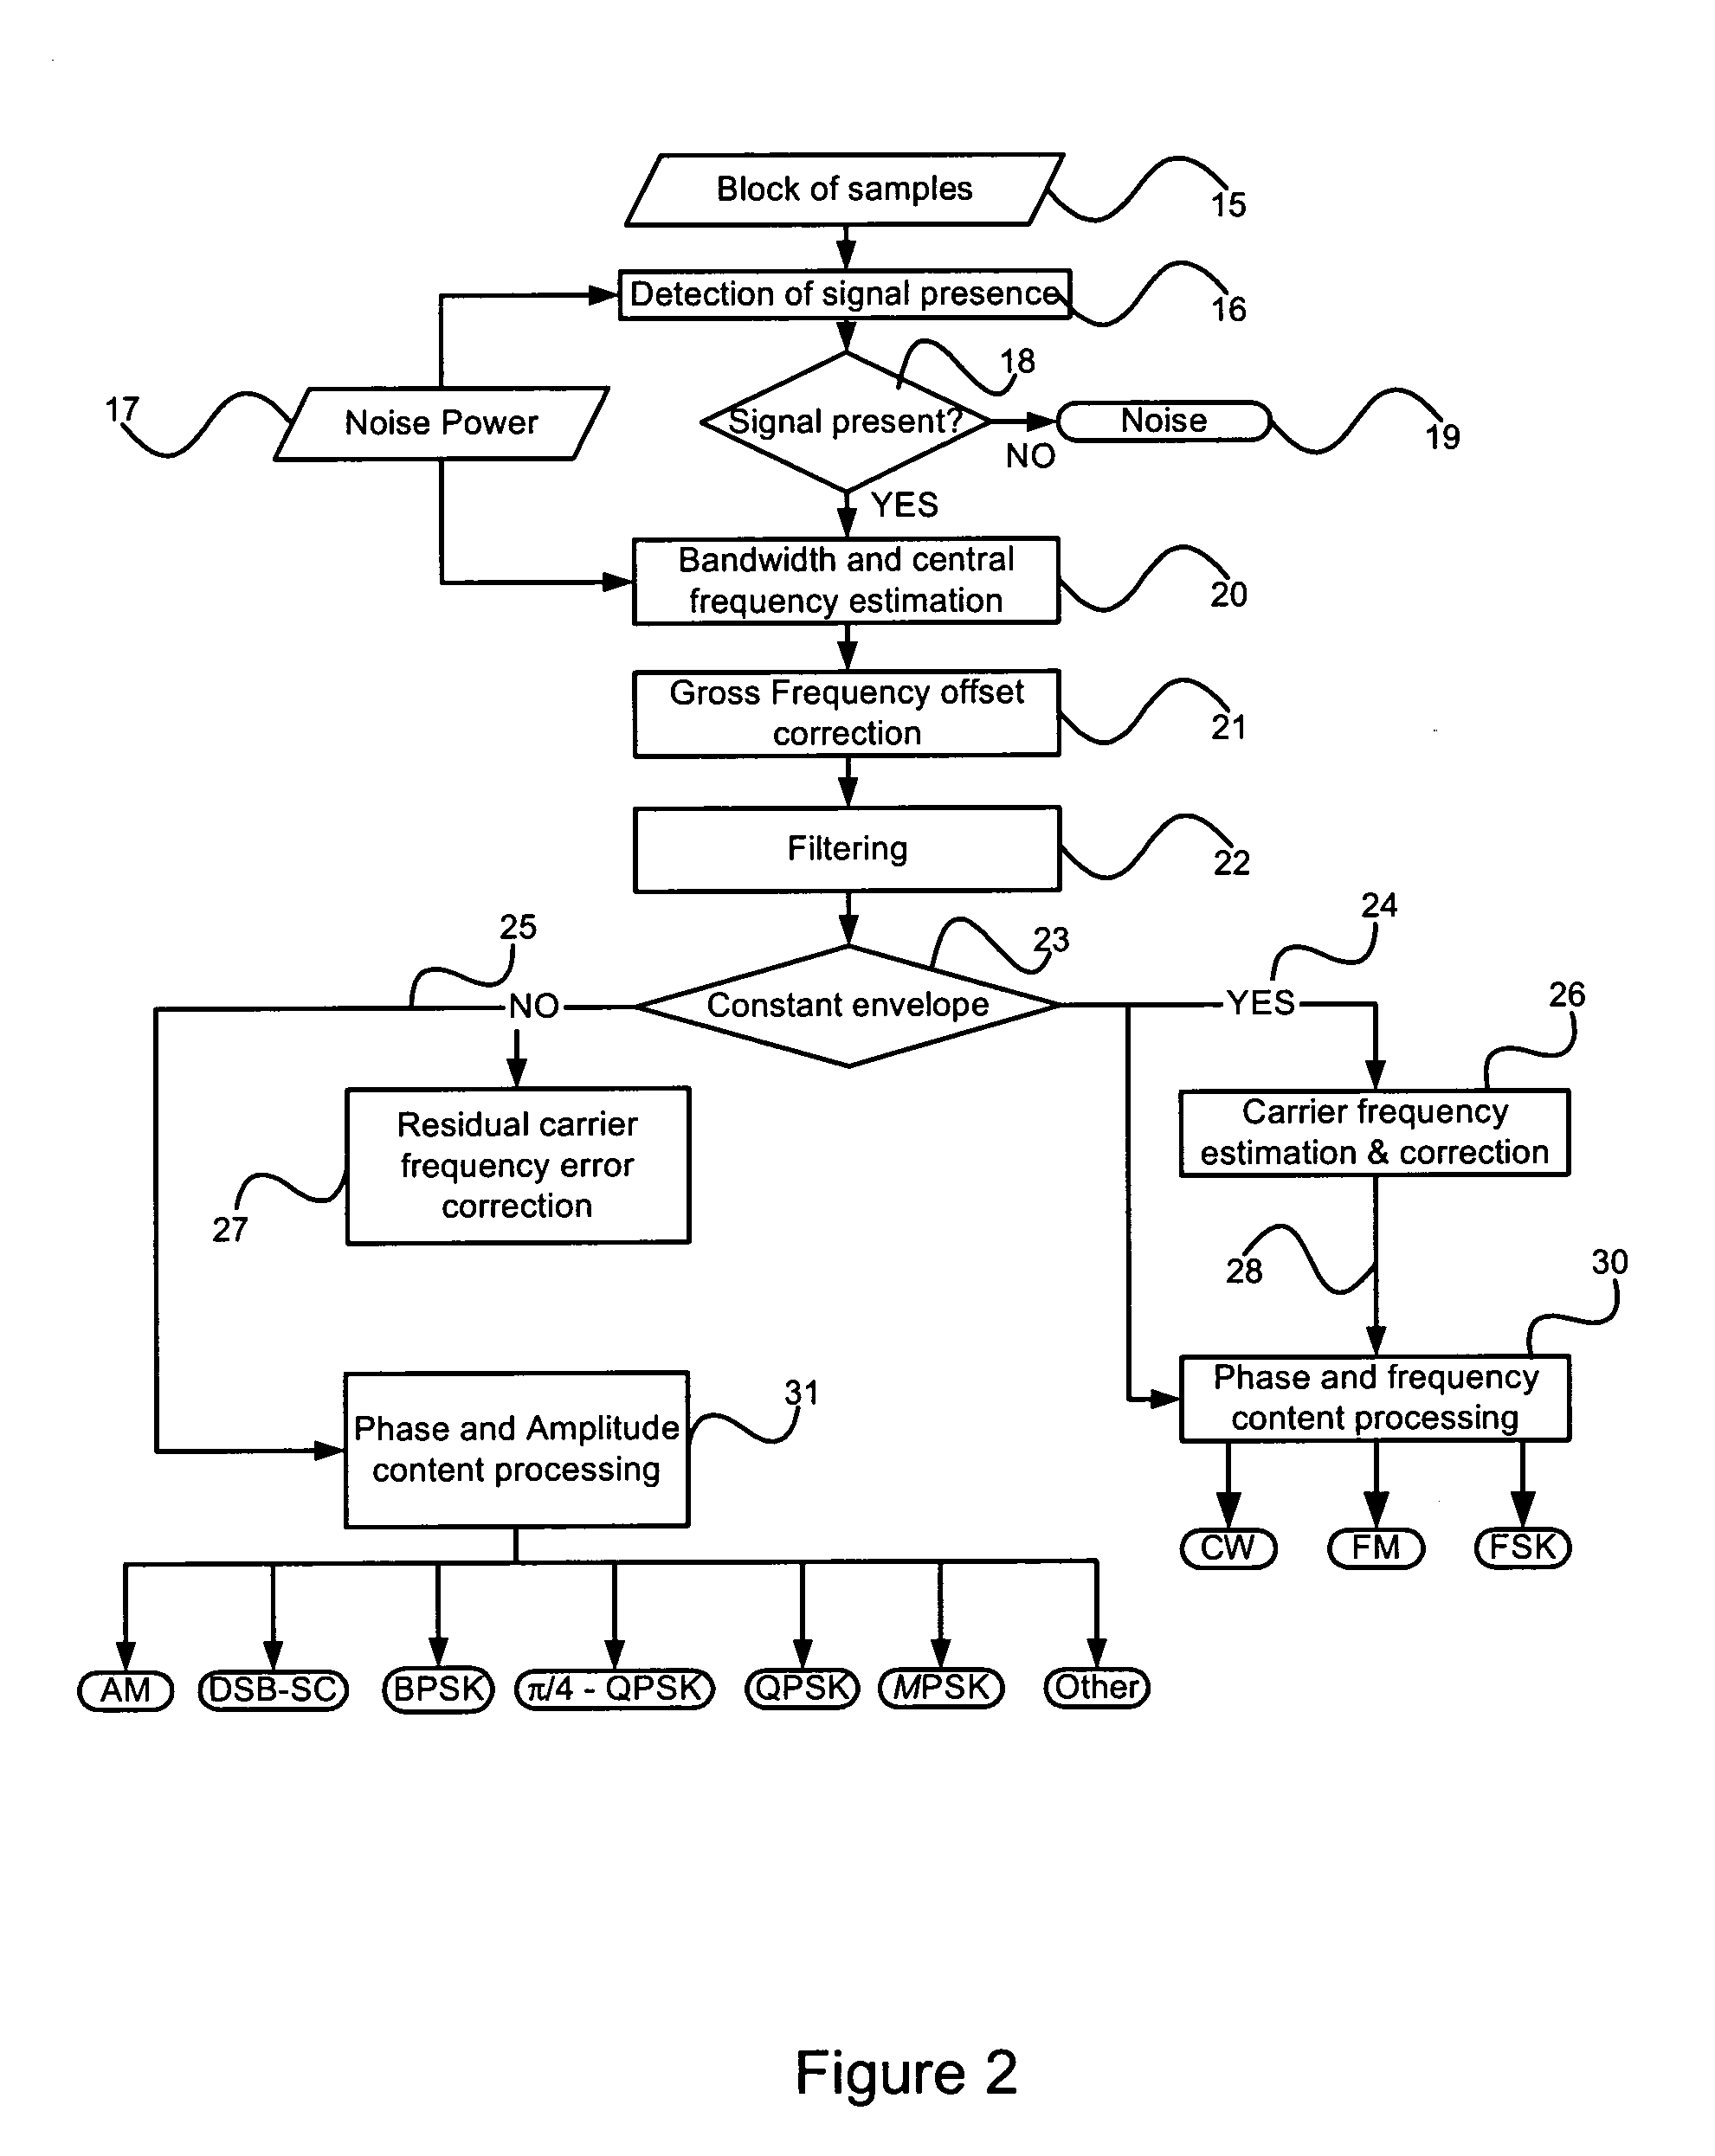 Method and system for detecting and classifying the modulation of unknown analog and digital telecommunications signals